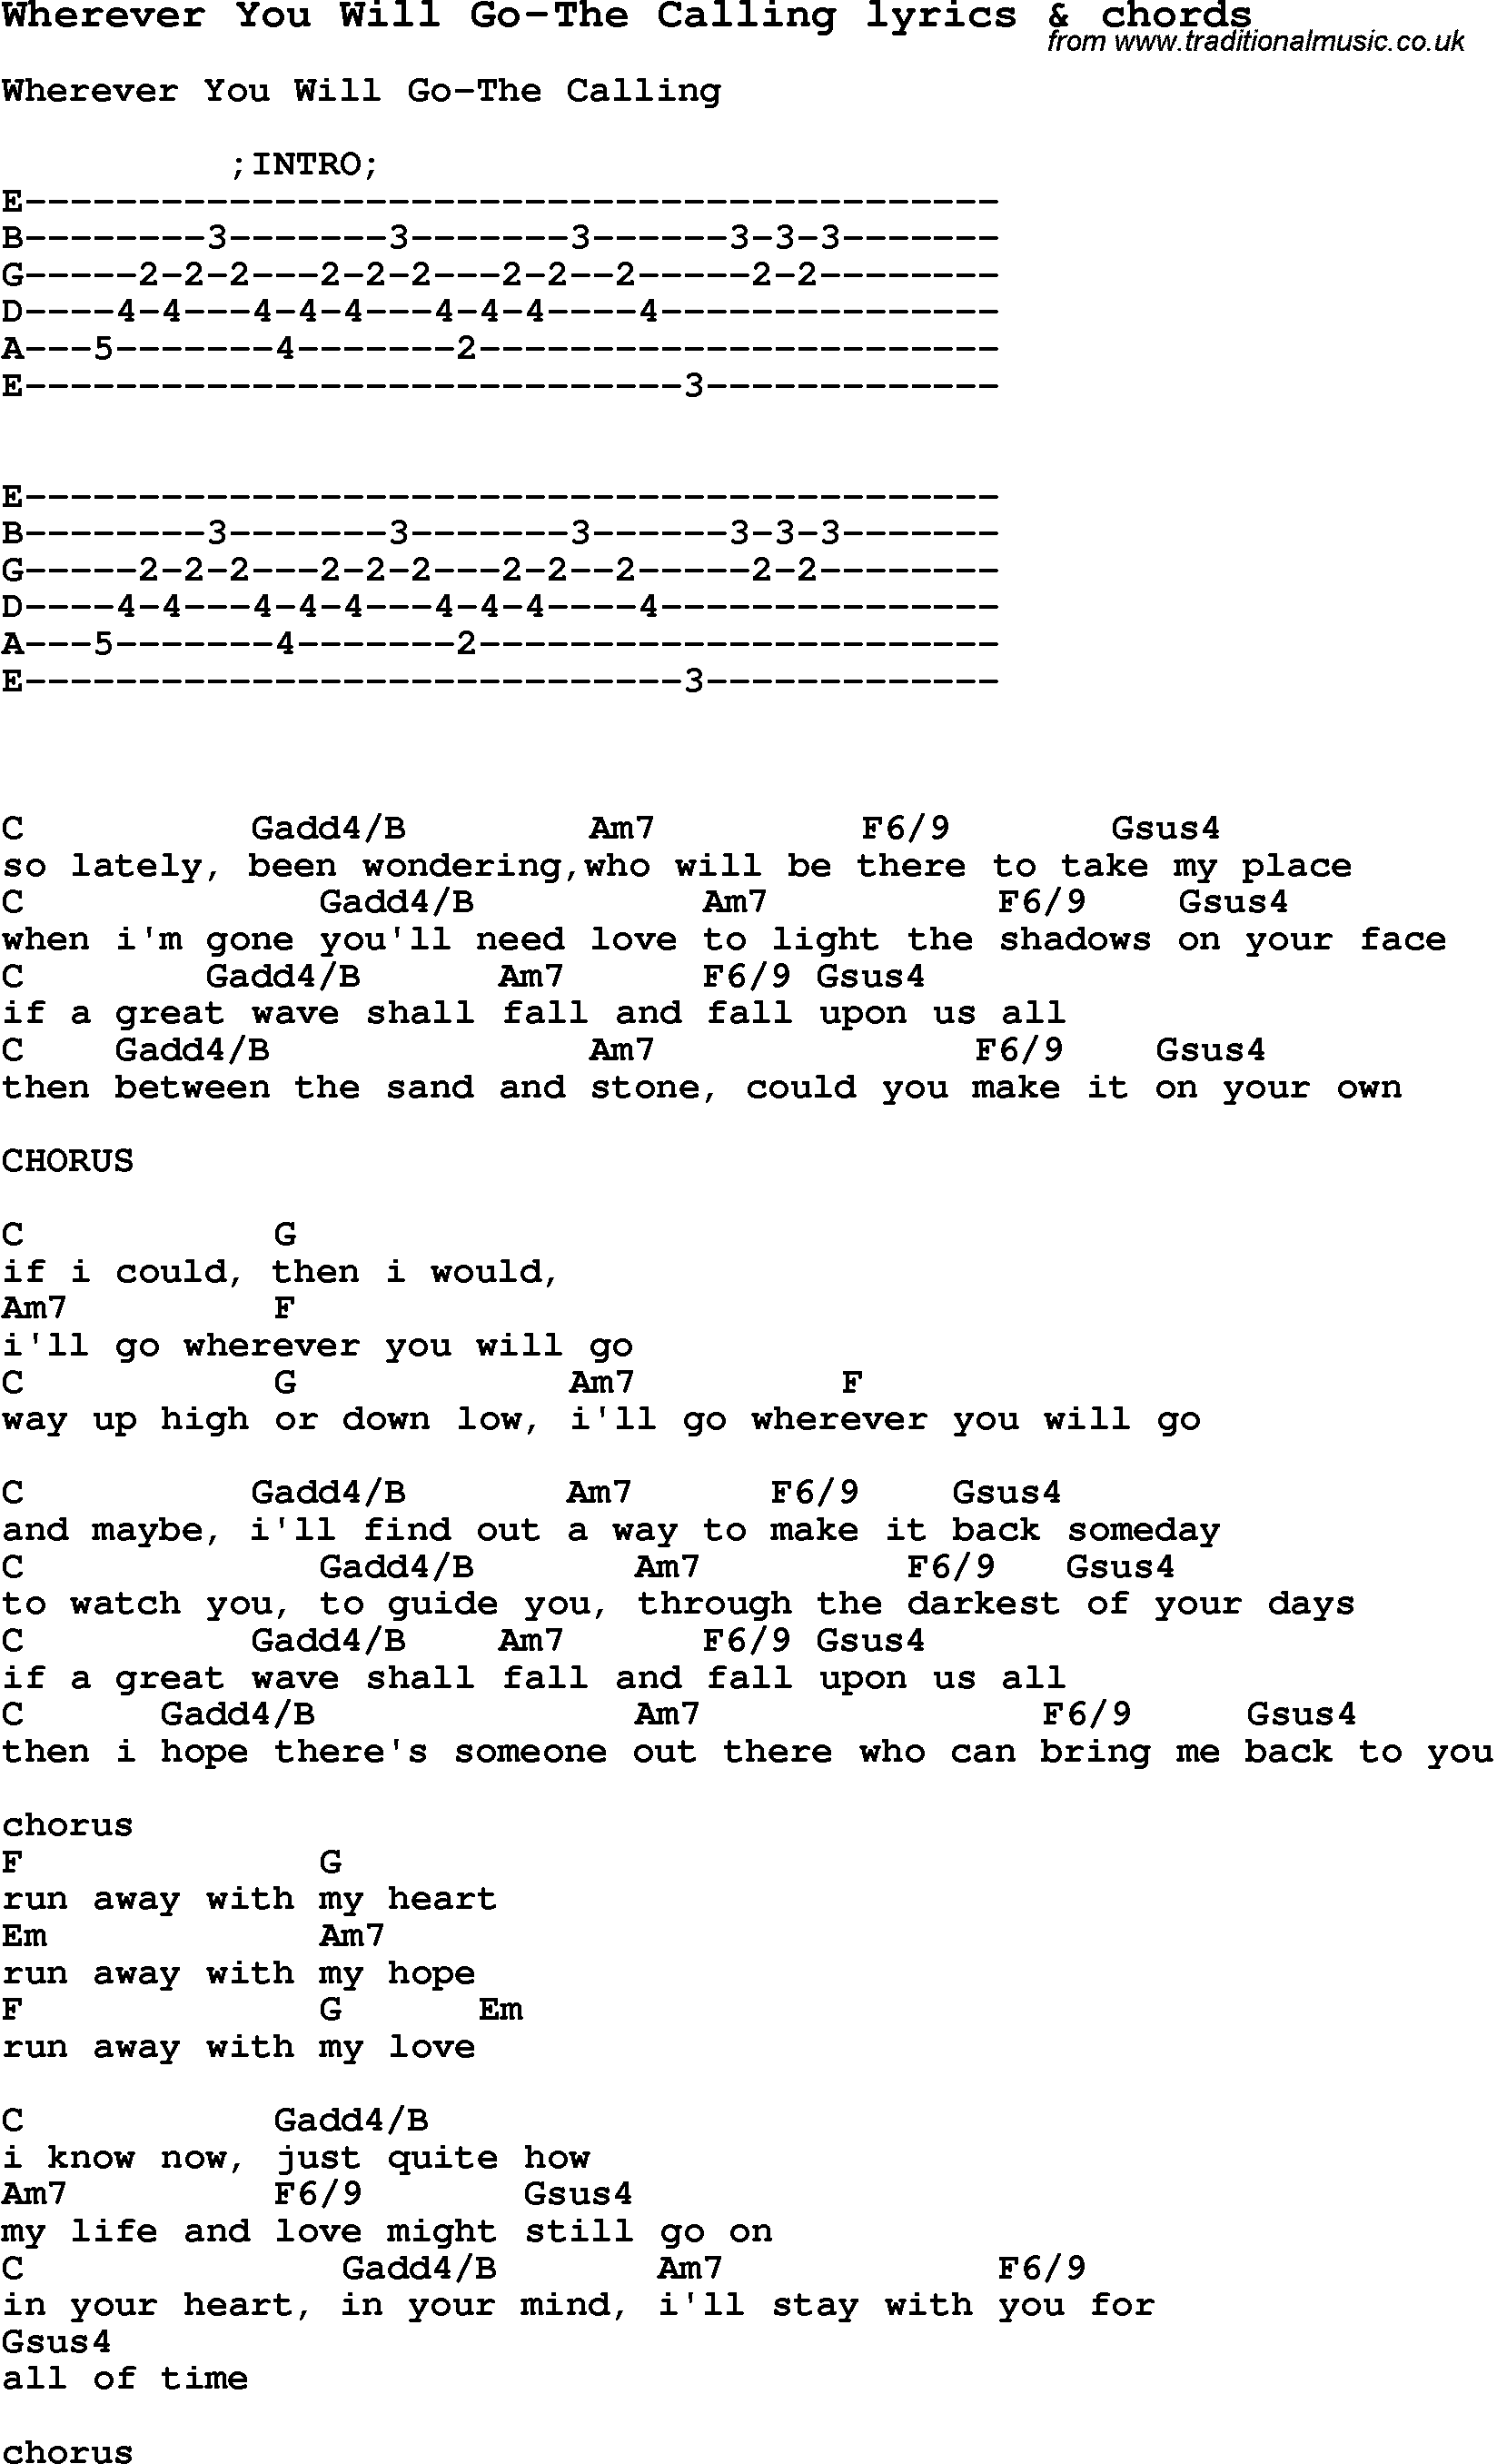 Love Song Lyrics for: Wherever You Will Go-The Calling with chords for Ukulele, Guitar Banjo etc.